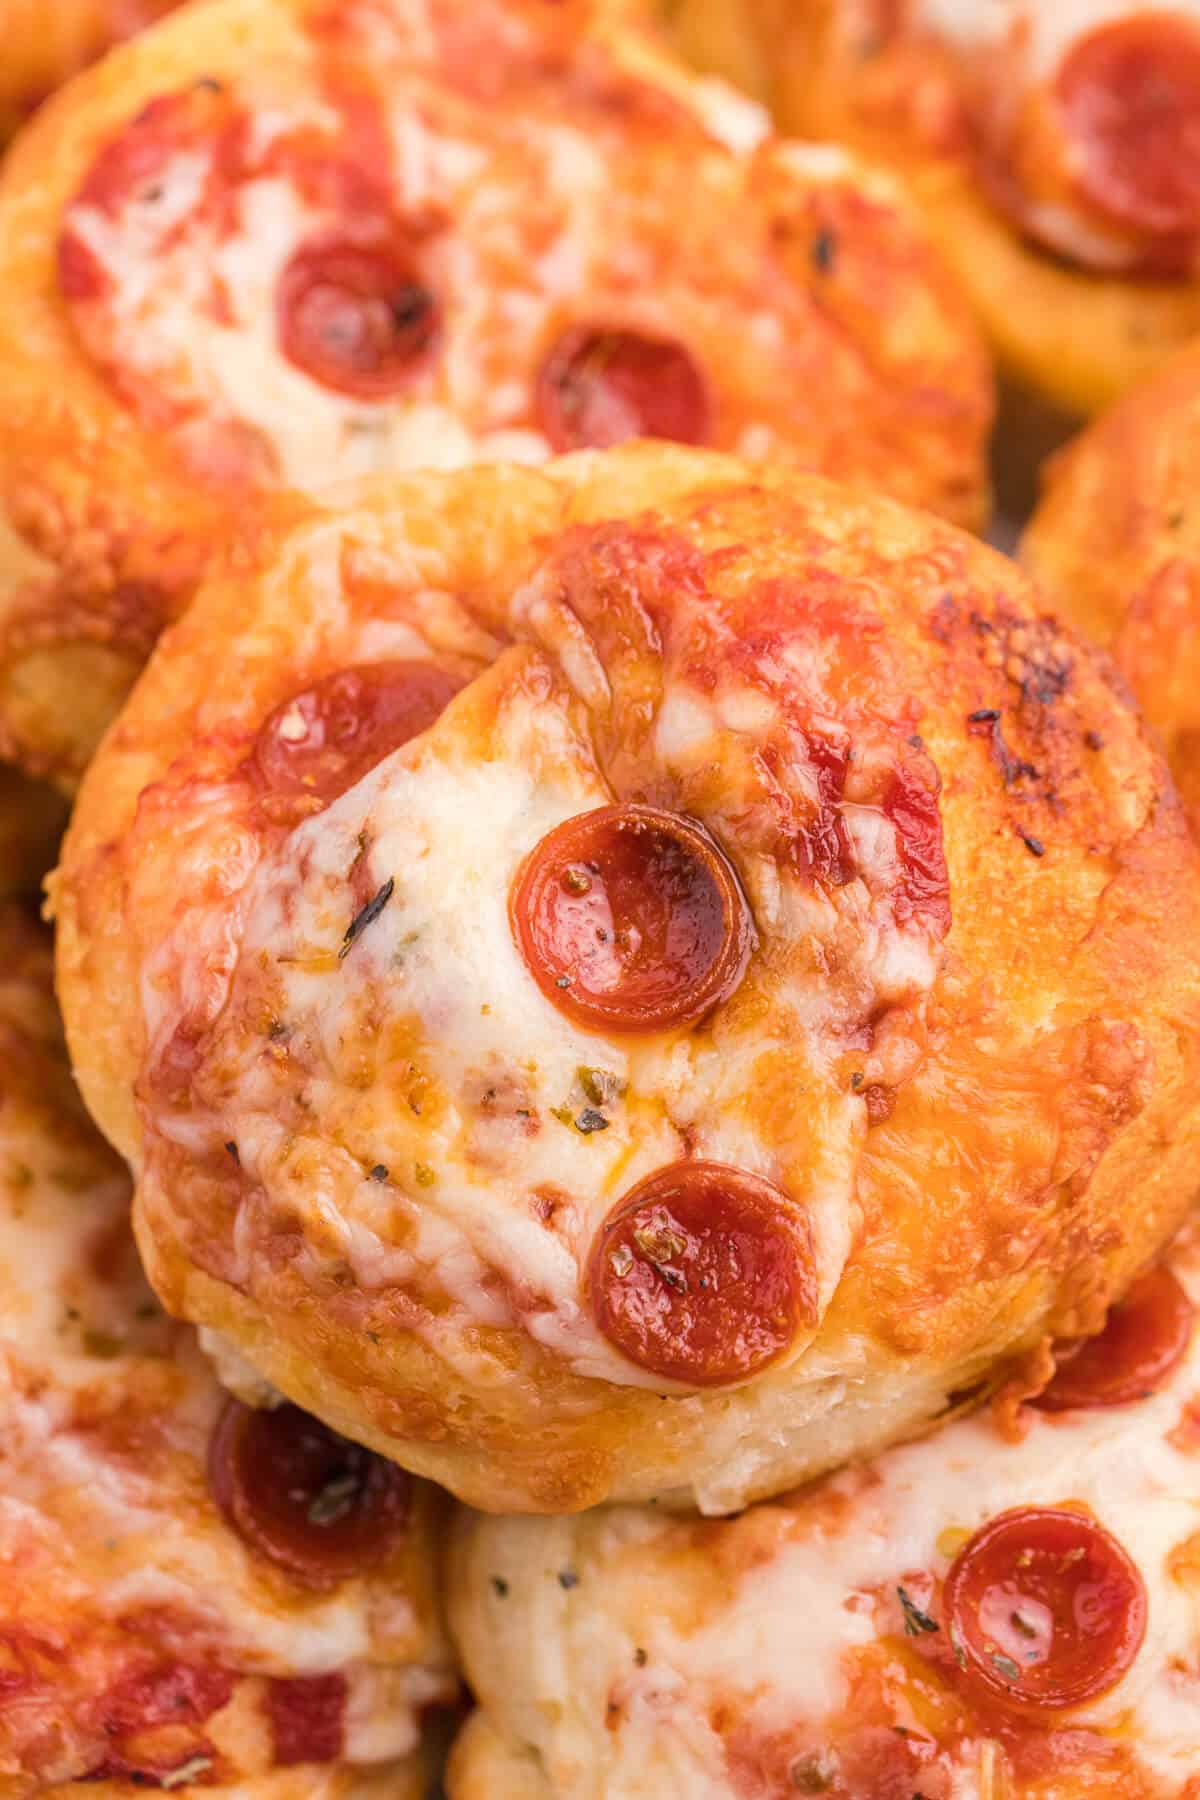 Air Fryer Pizza Buns - This simple recipe is perfect for snacking, an appetizer or for your kids' school lunch. Air fried to golden perfection, these savory buns are easy to make with refrigerated dough, pizza sauce, mozzarella cheese and pepperoni.